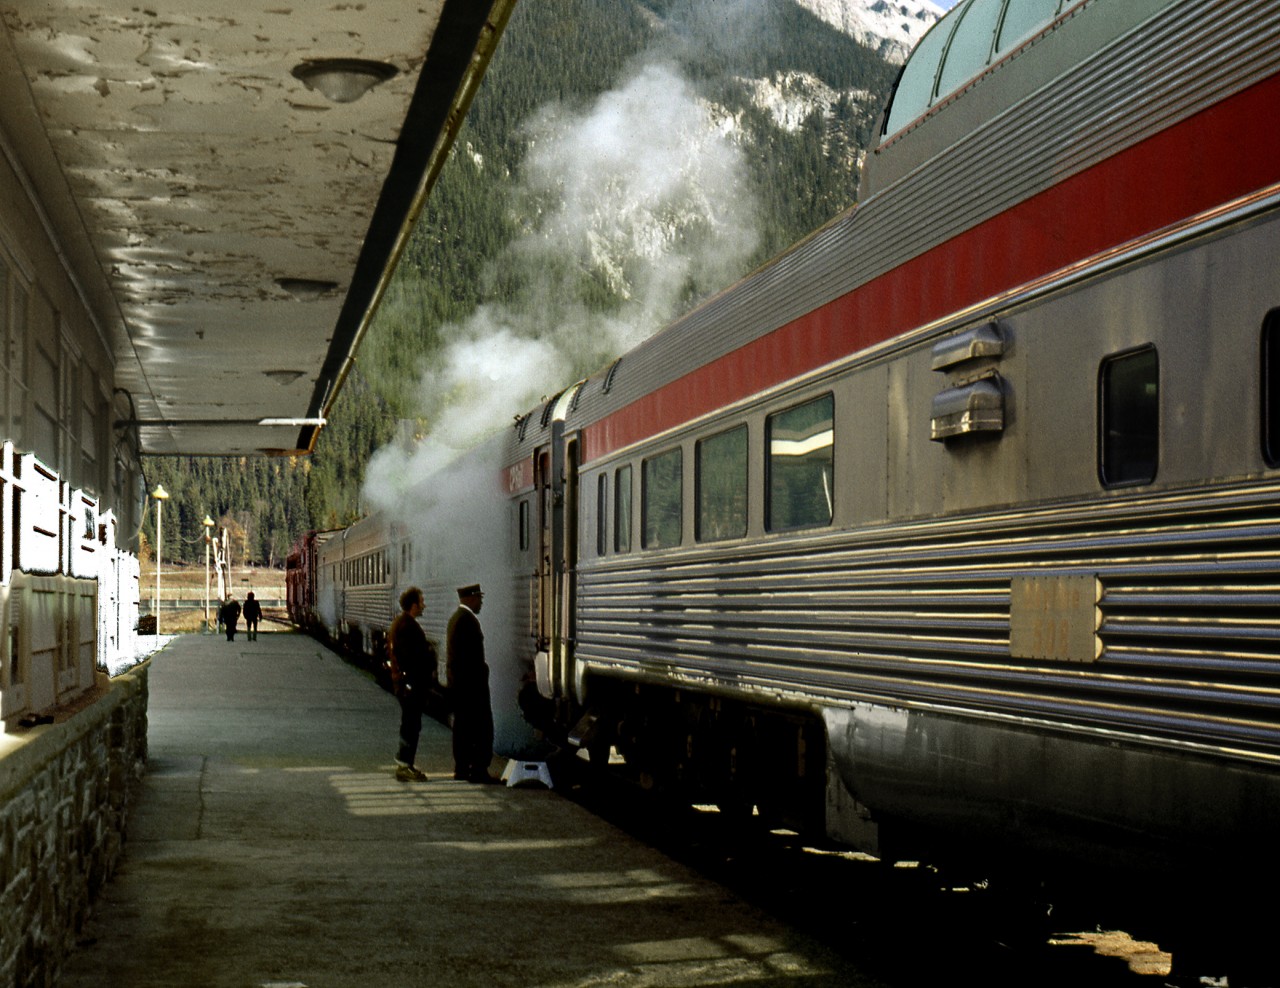 During The eastbound Canadian's stop and crew change in Field a carman discusses a steam leak with a sleeping car porter